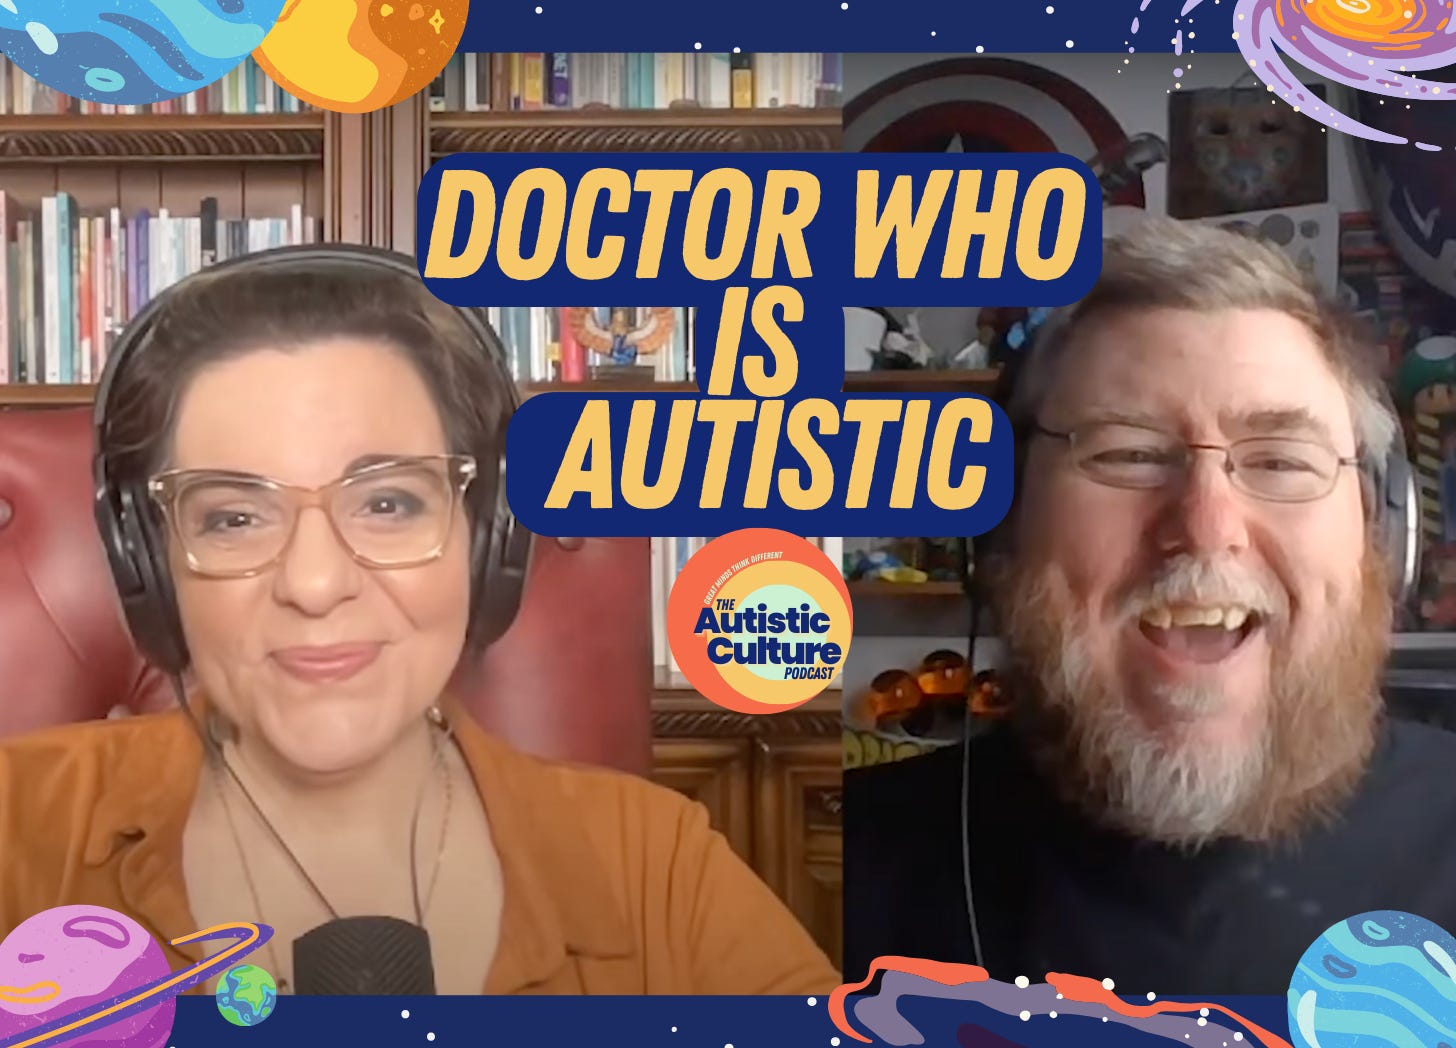 Listen to Autistic podcast hosts discuss: is Doctor Who Autistic?. Autism Podcast | Explore the remarkable bond between Doctor Who and the Autistic community. Why do we love this Autistic character and the Autistic actors who played them?  Listen to find out!